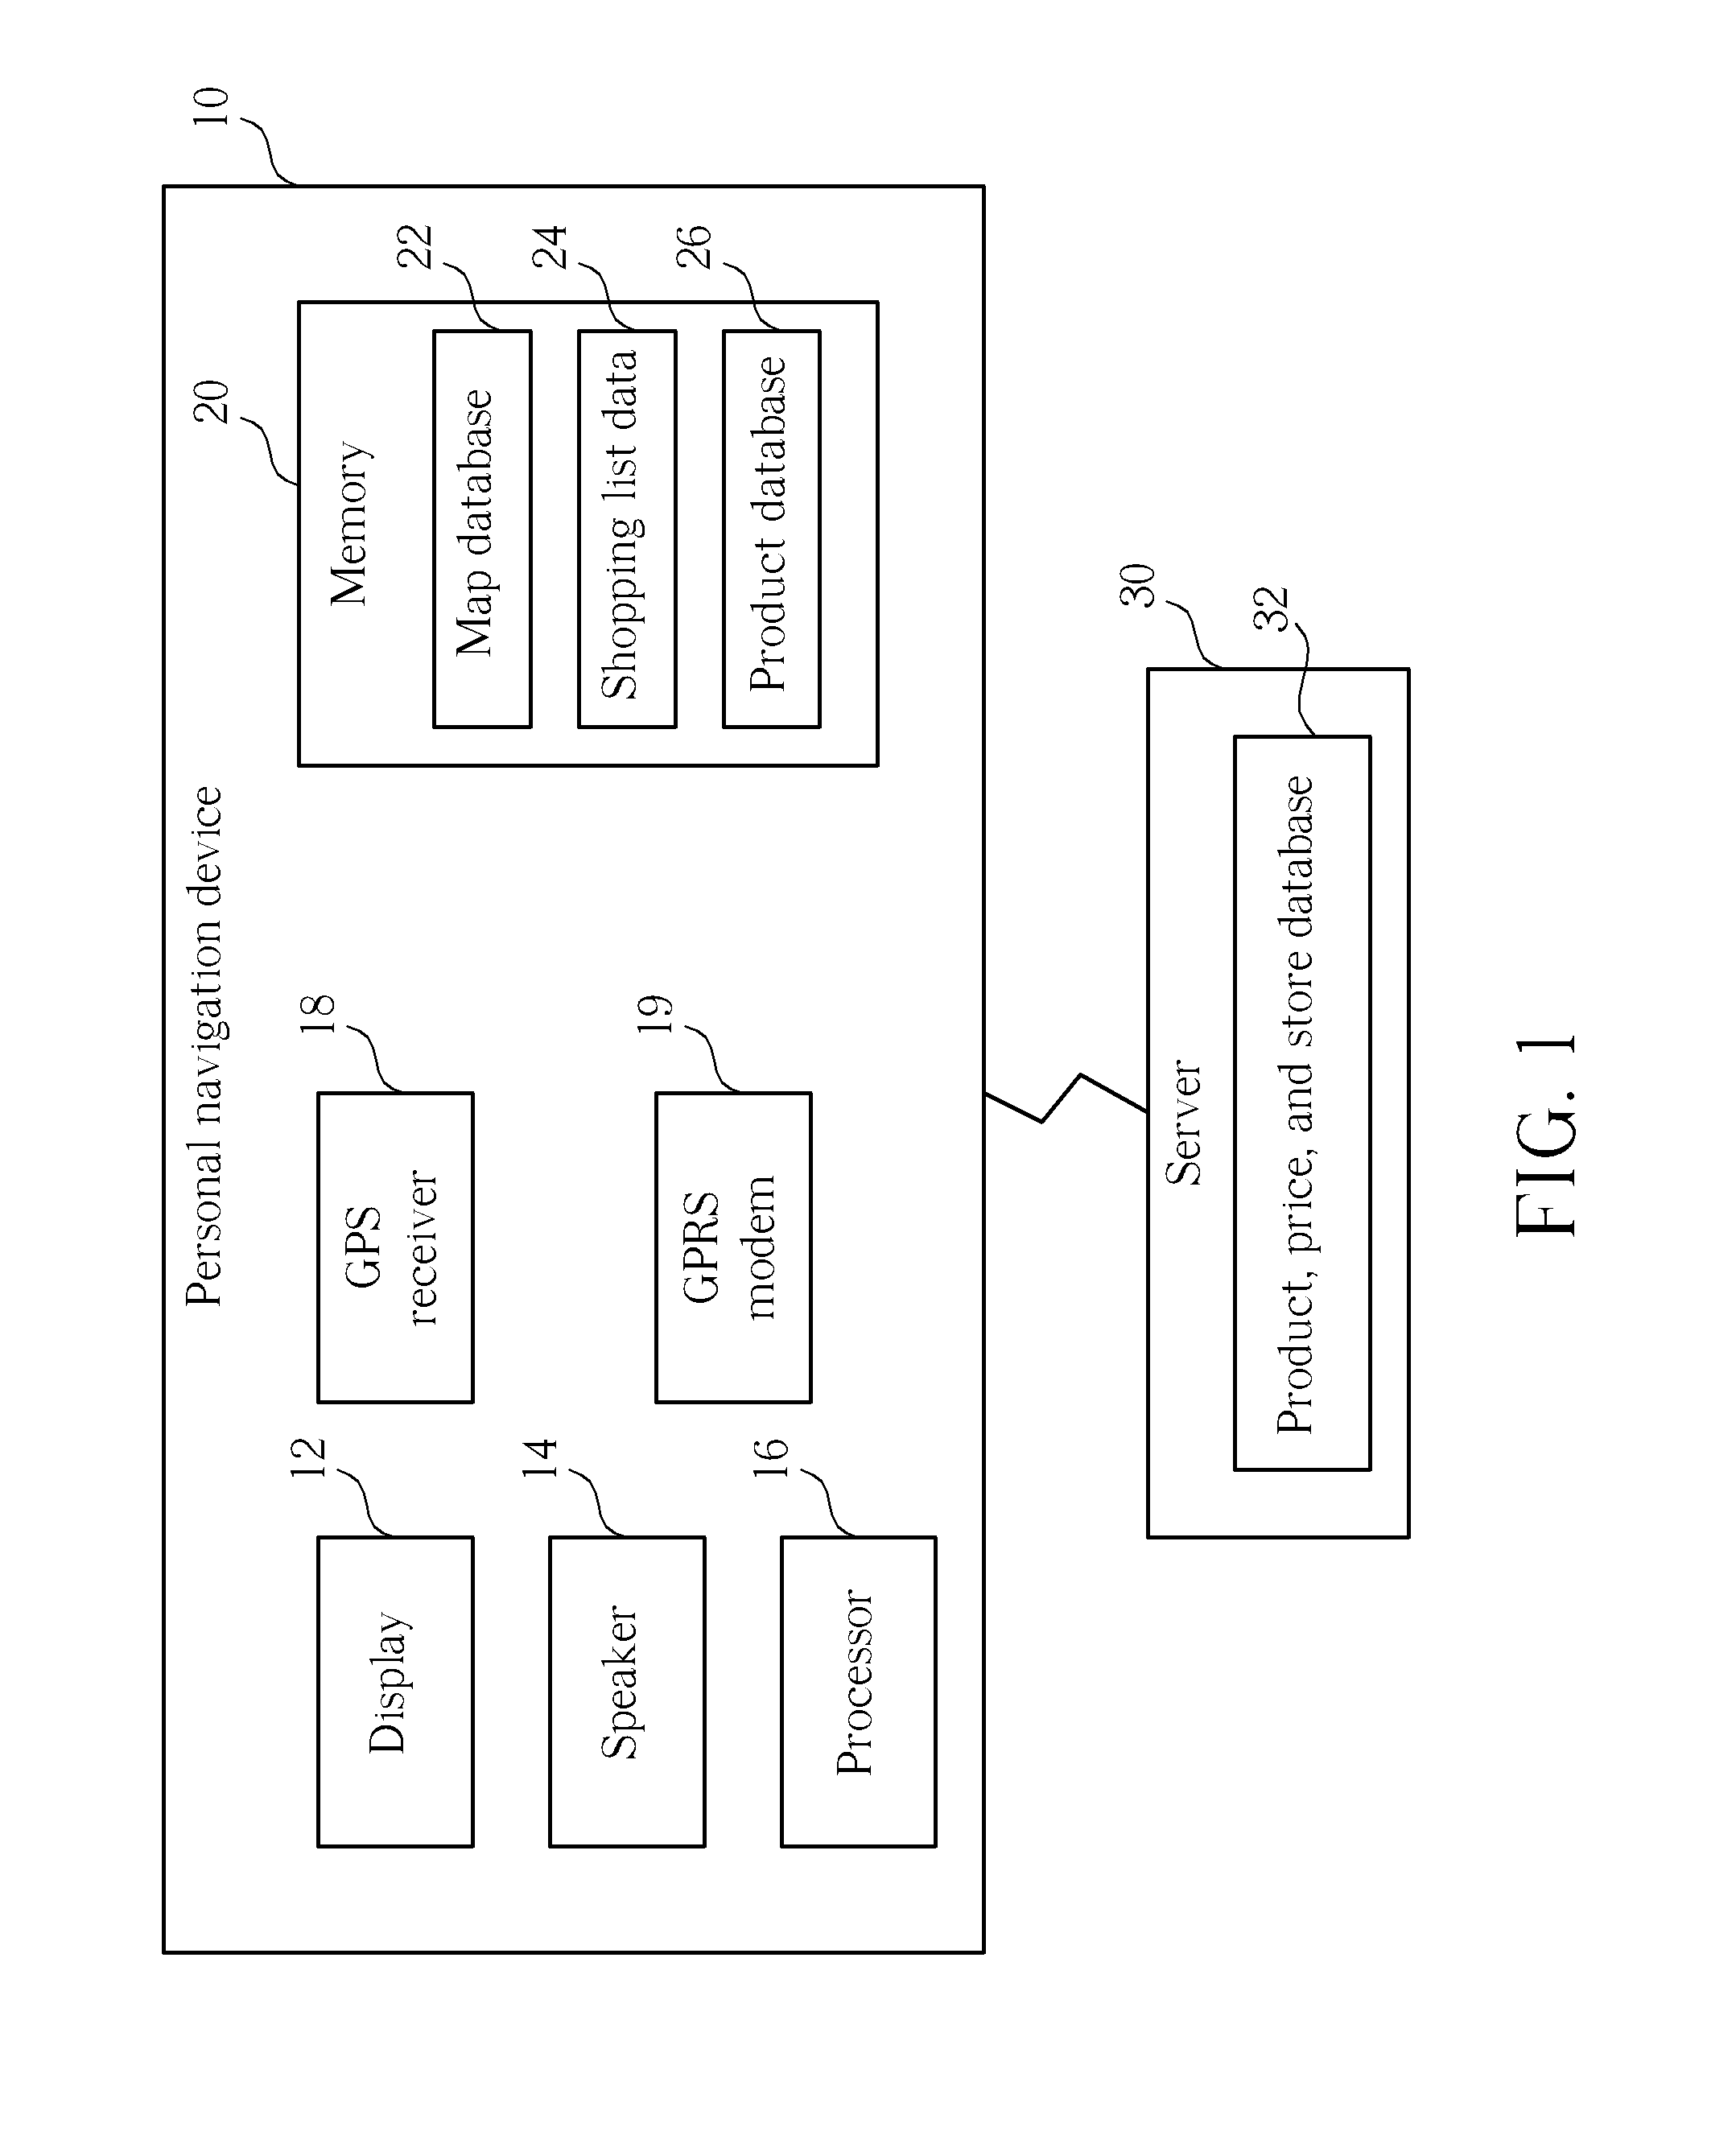 Method of locating nearby low priced items using a personal navigation device